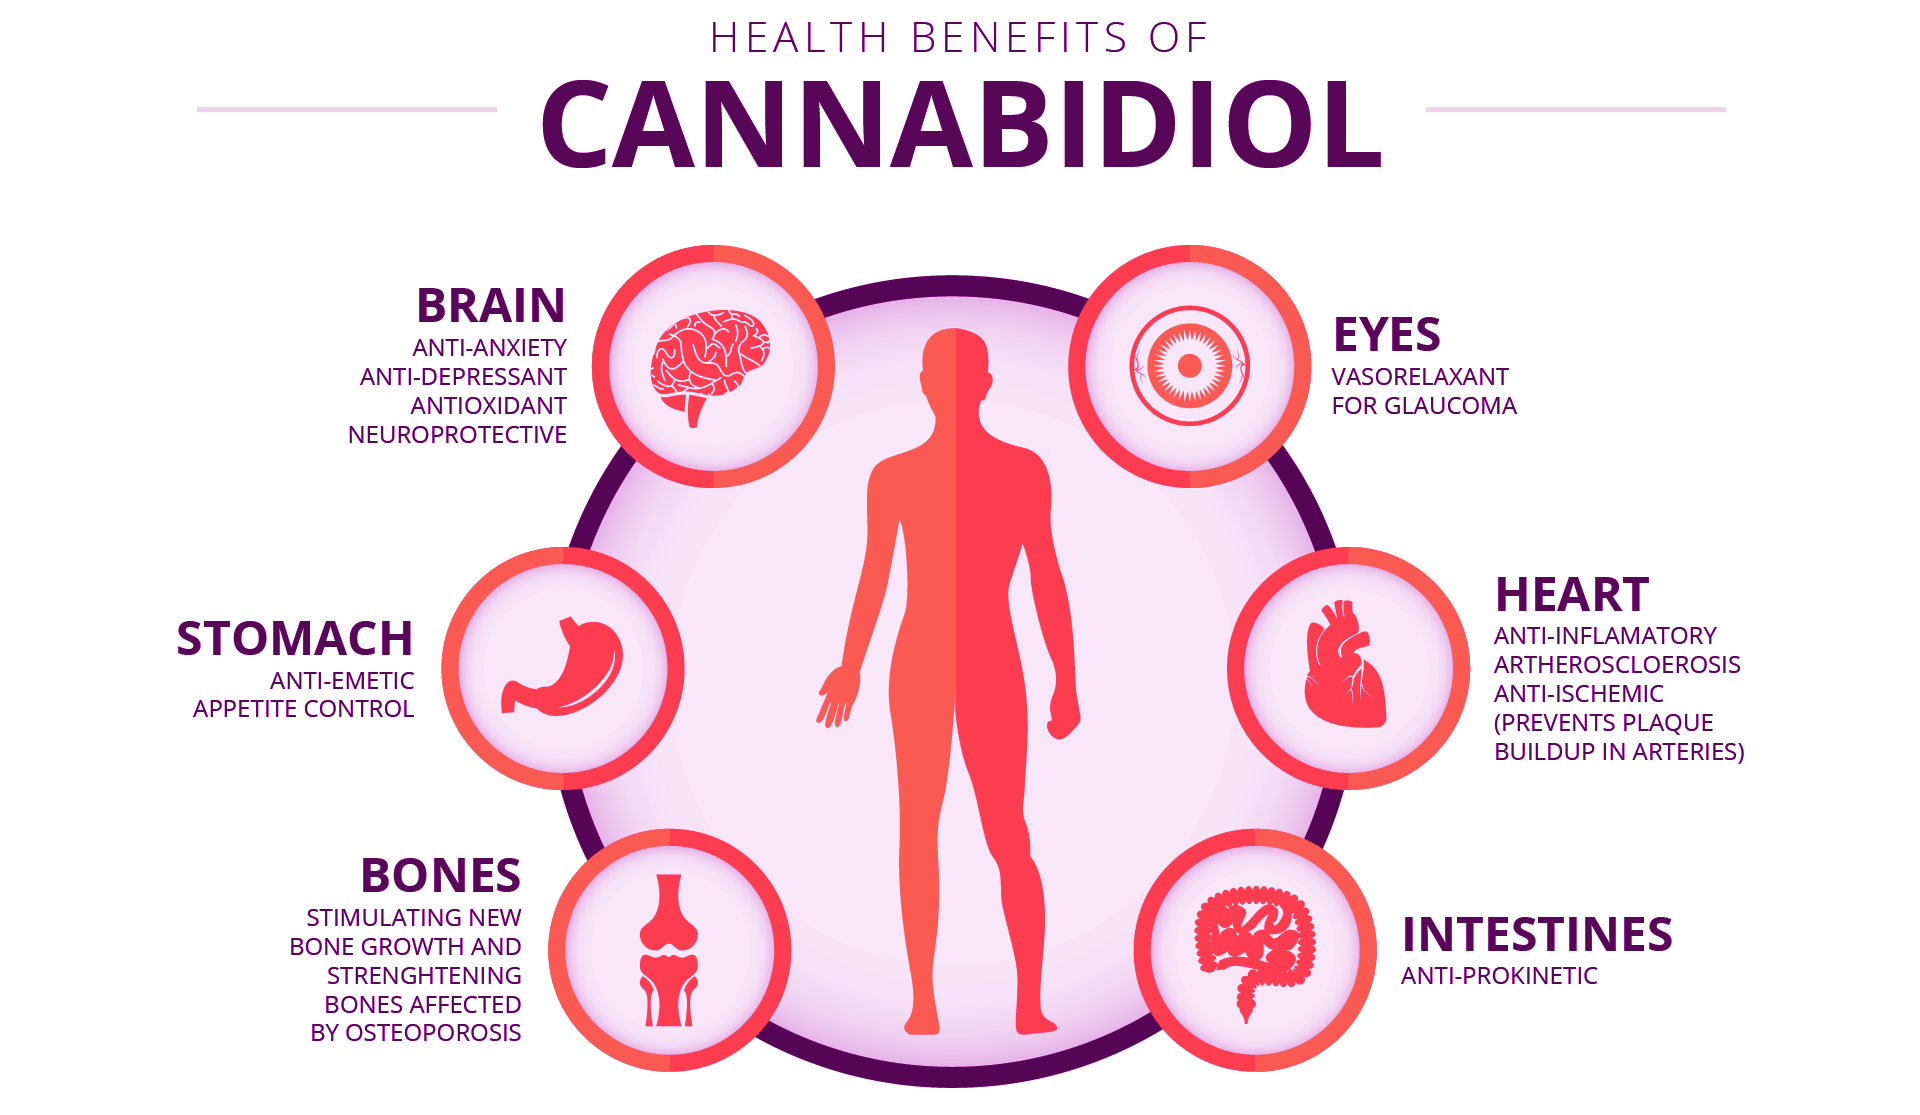 What does CBD do?